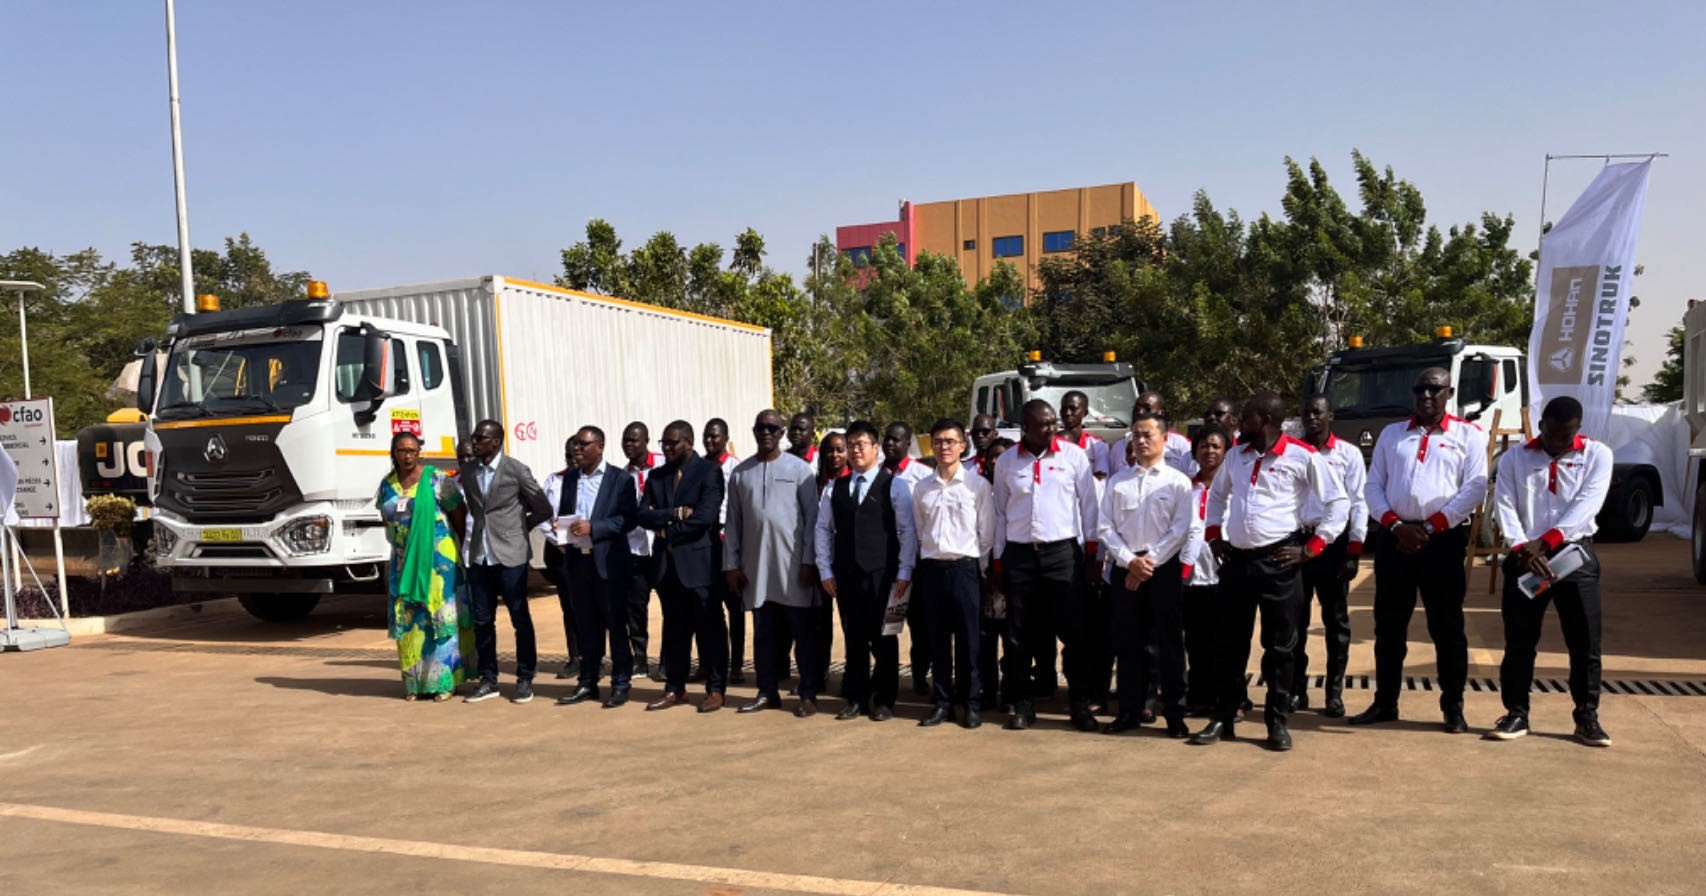 HOHAN Promotion Day in Burkina Faso